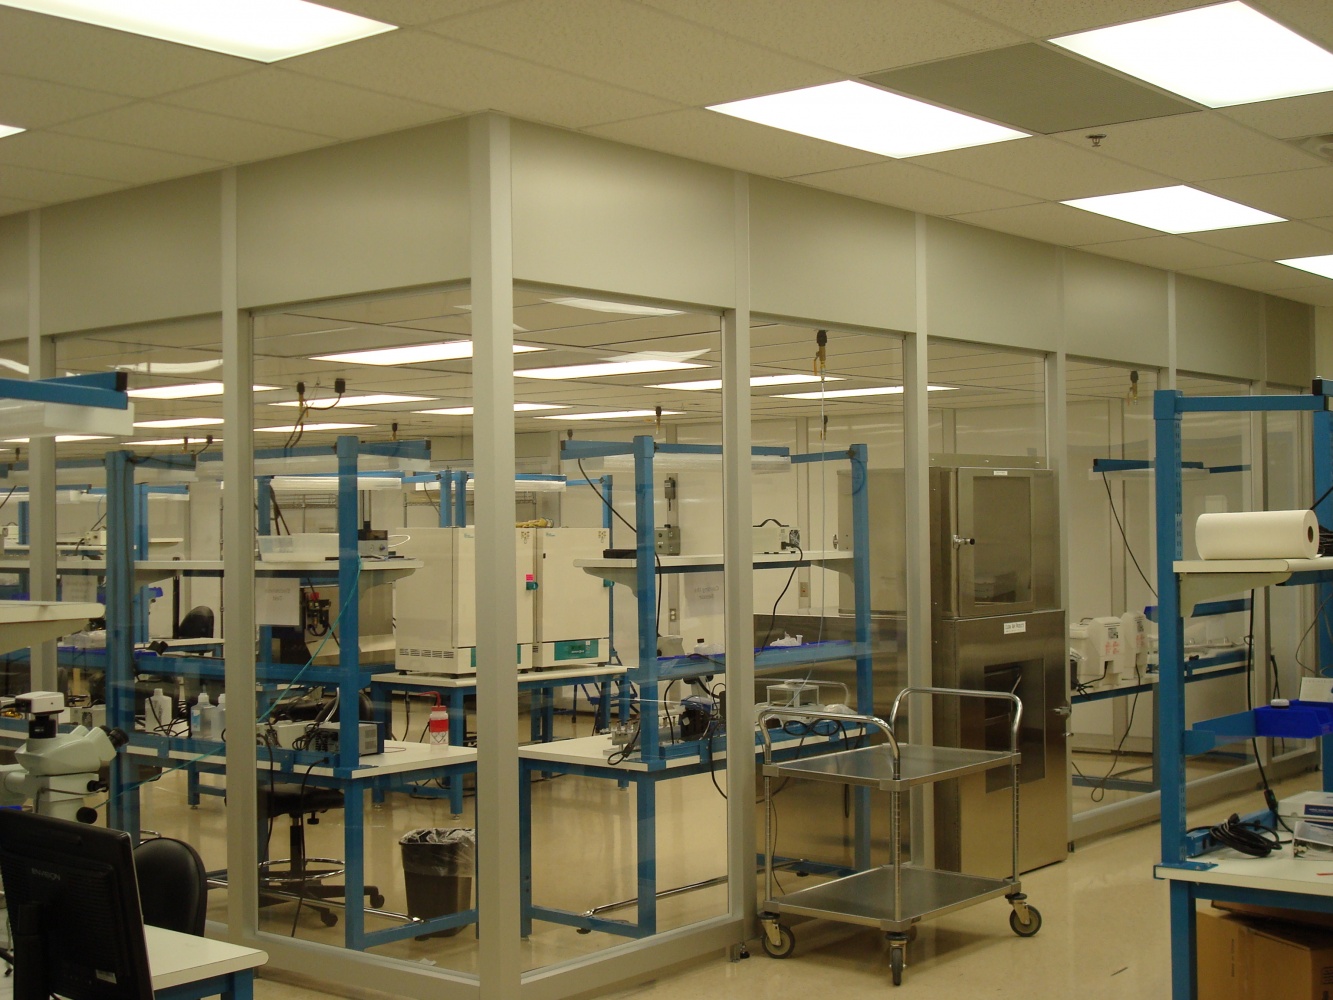 How to Achieve Aseptic Conditions in Medical Cleanrooms - Angstrom